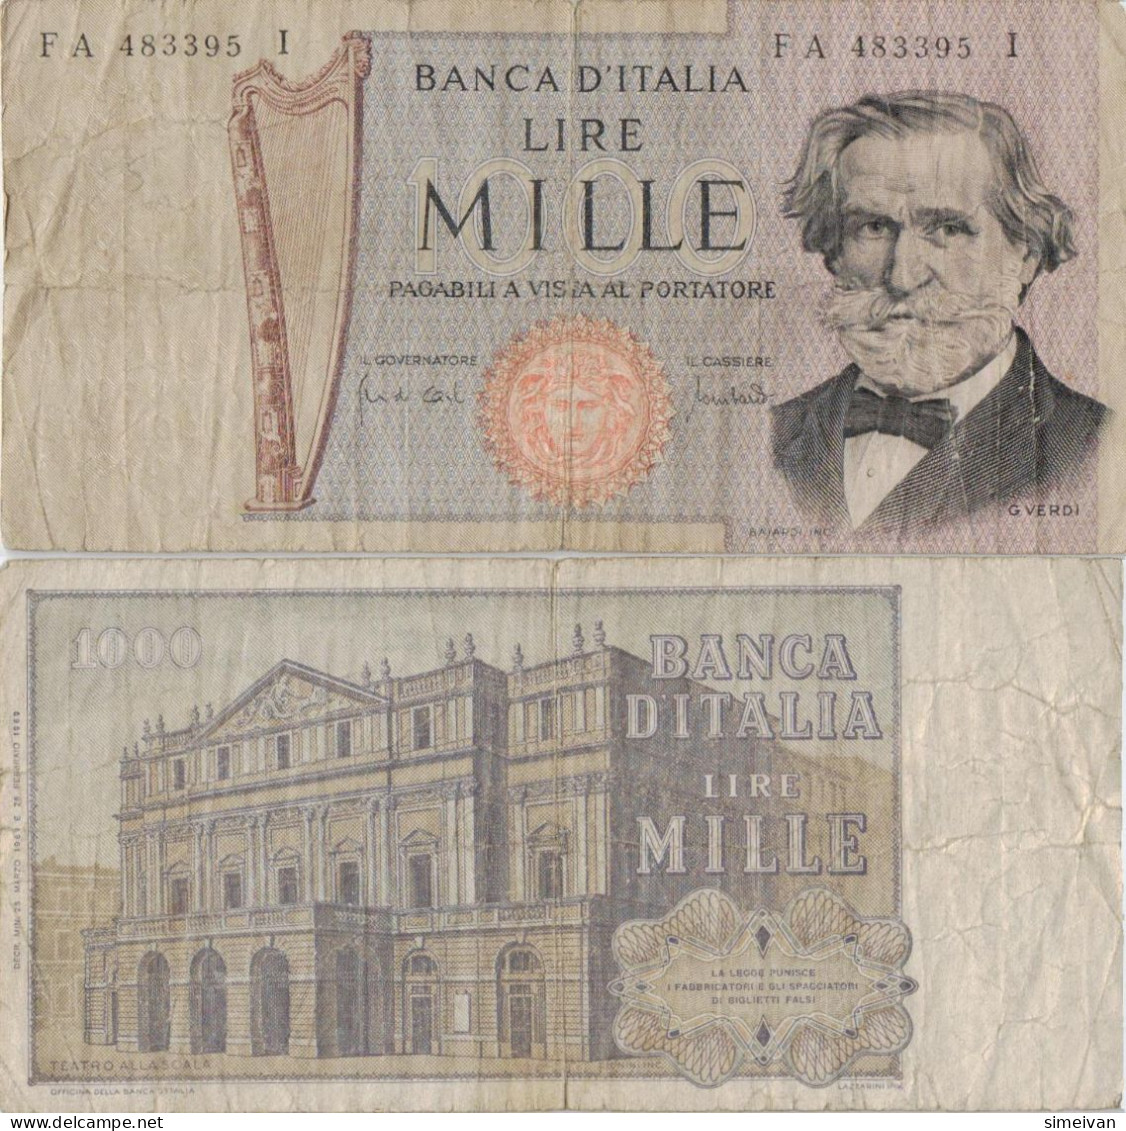 Italy 1000 Lire 1969 P-101a Banknote Europe Currency Italie Italien #5173 - 1000 Lire